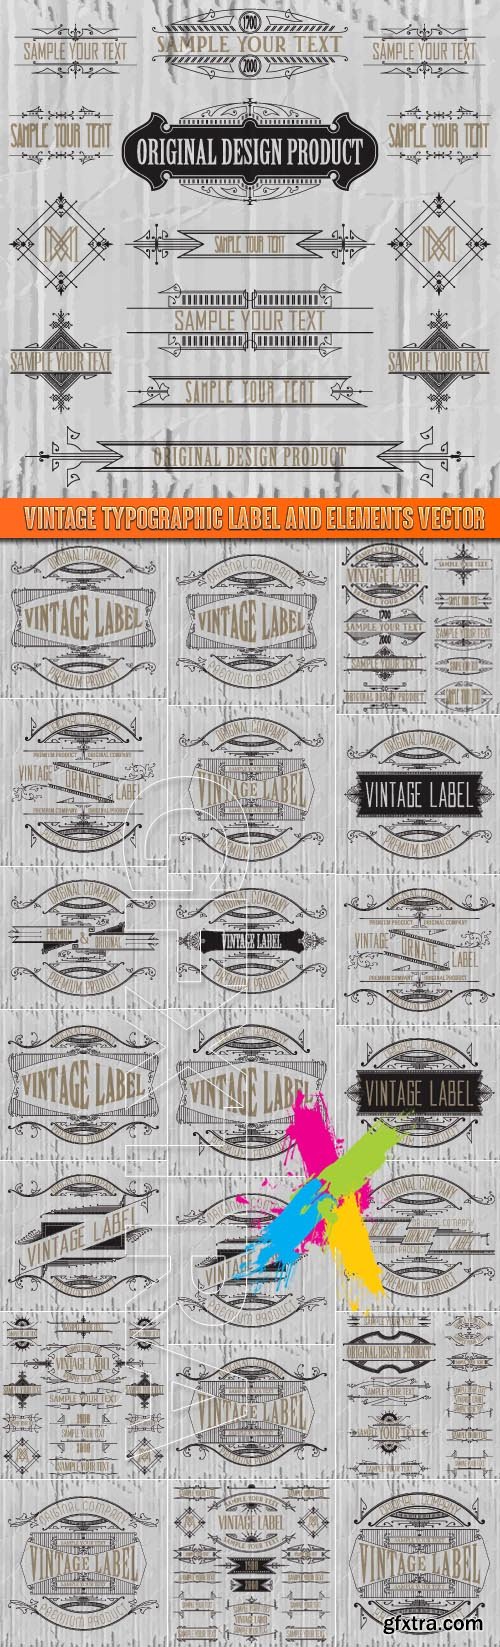 Vintage typographic label and elements vector